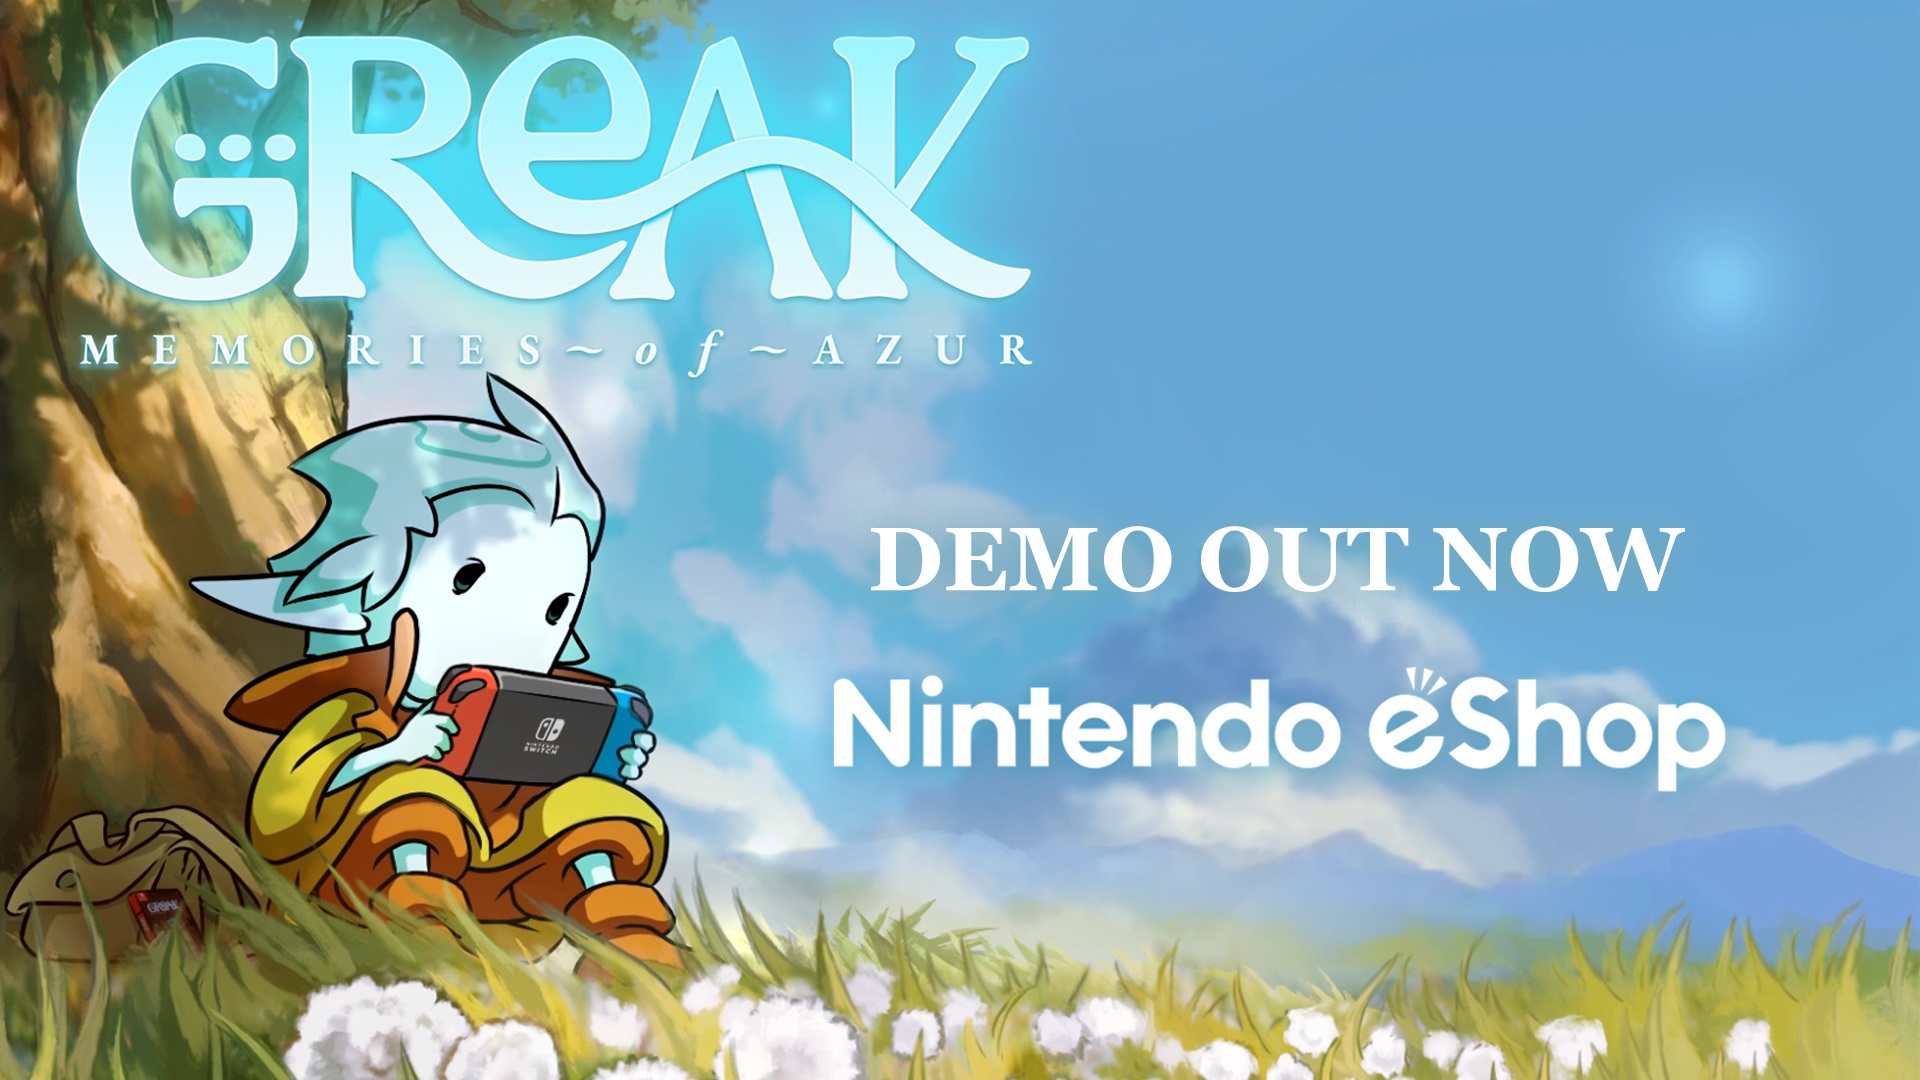 Greak: Memories of Azur Playable Demo is Now Available